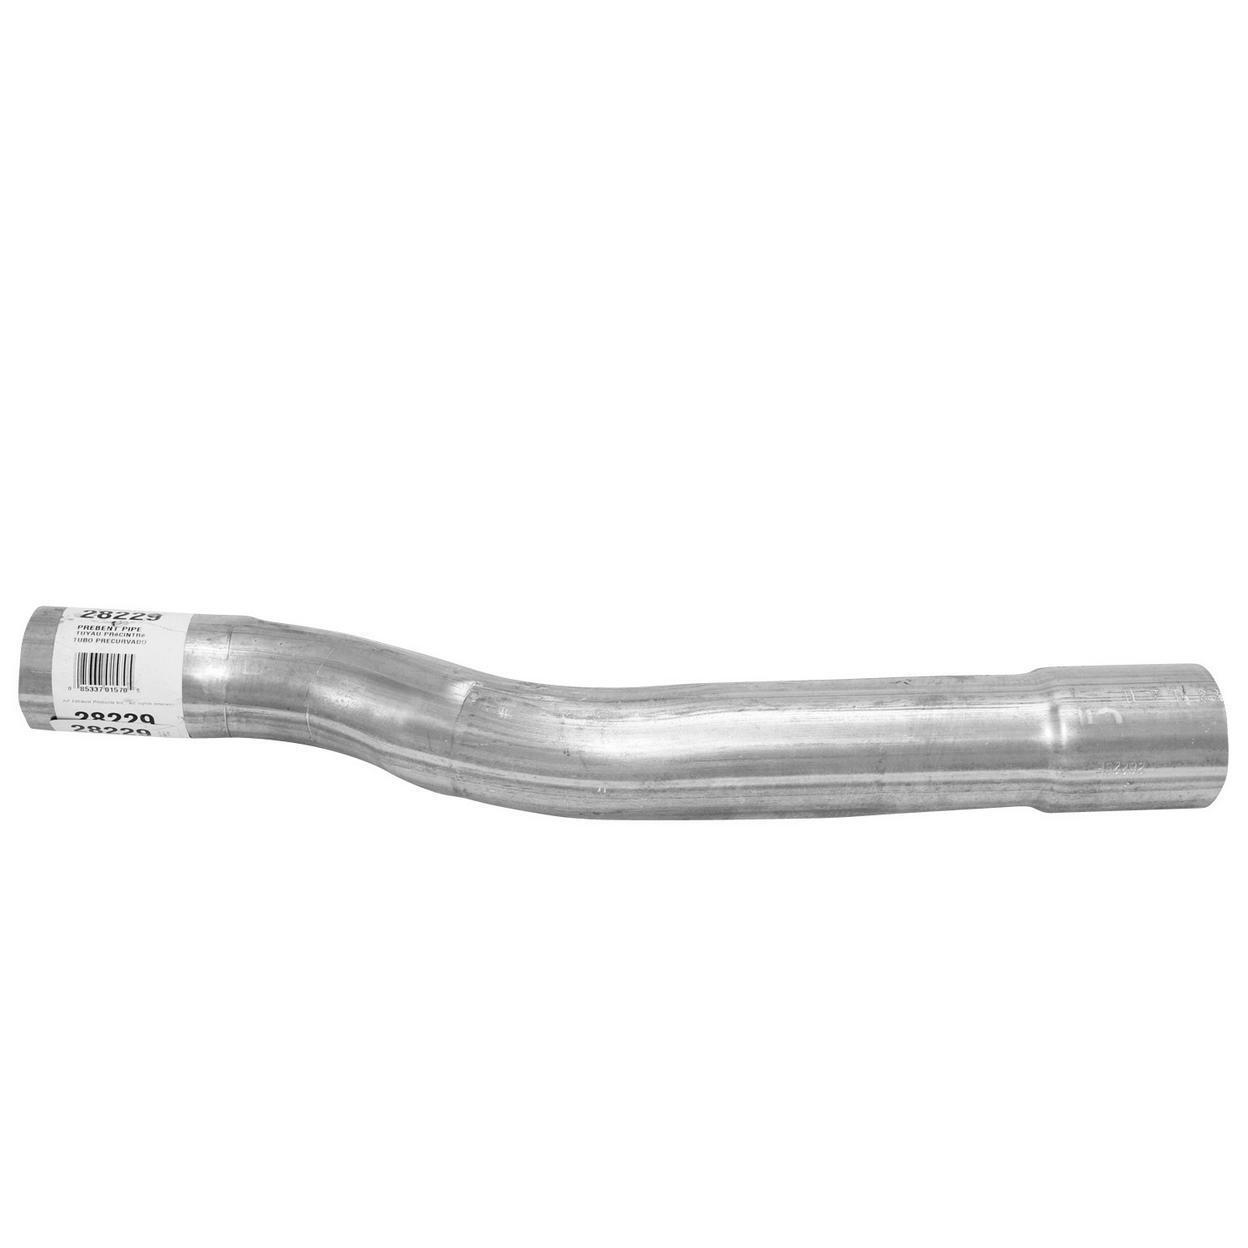 Exhaust Pipe for 1989 Volvo 740 GLE